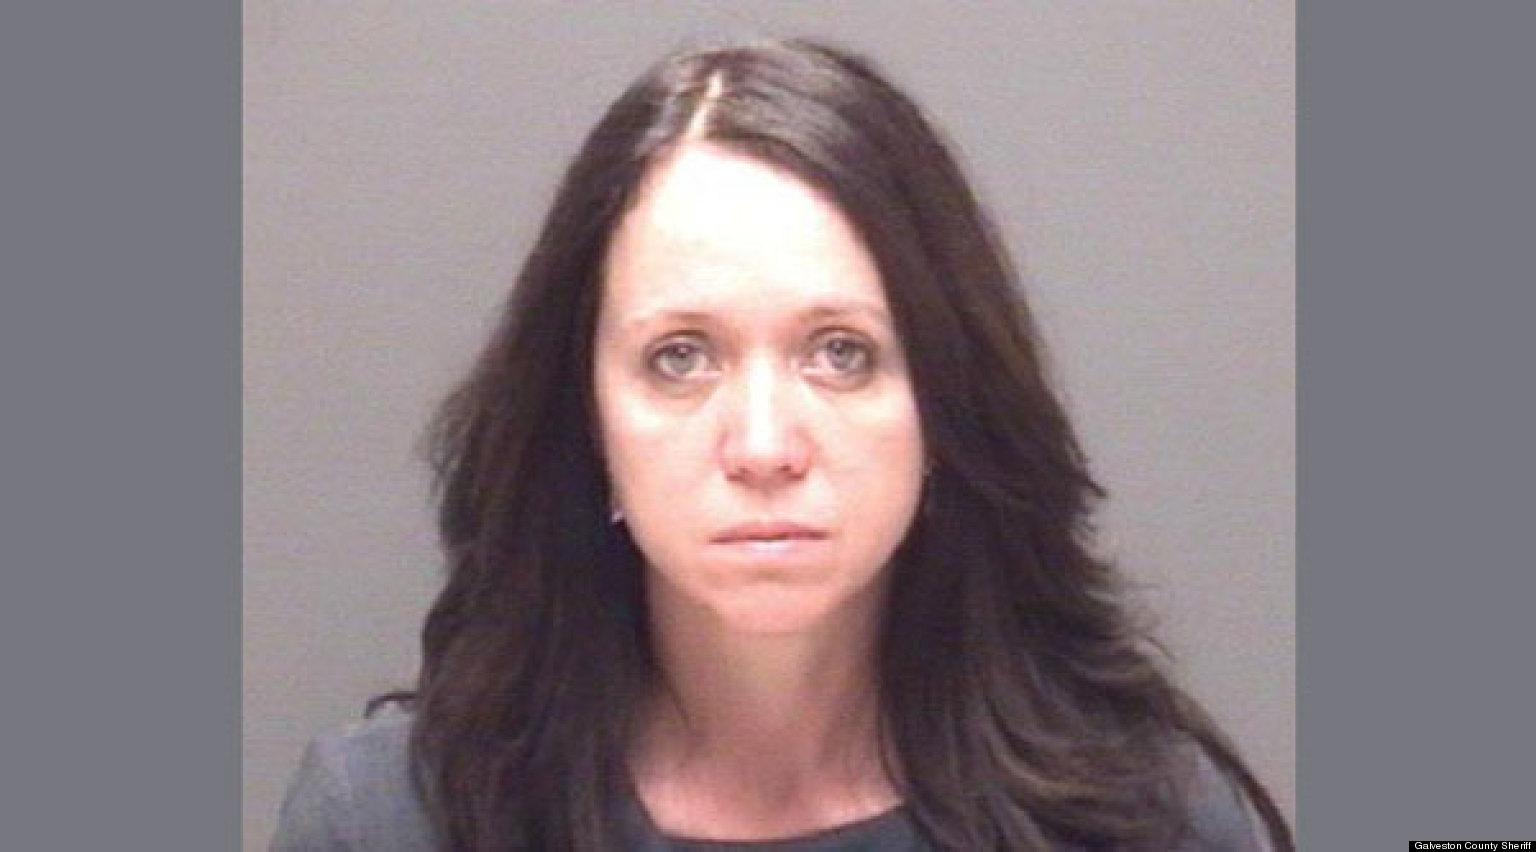 Stephanie Forbes, Texas Teacher, Accused Of Ongoing Sexual Relationship